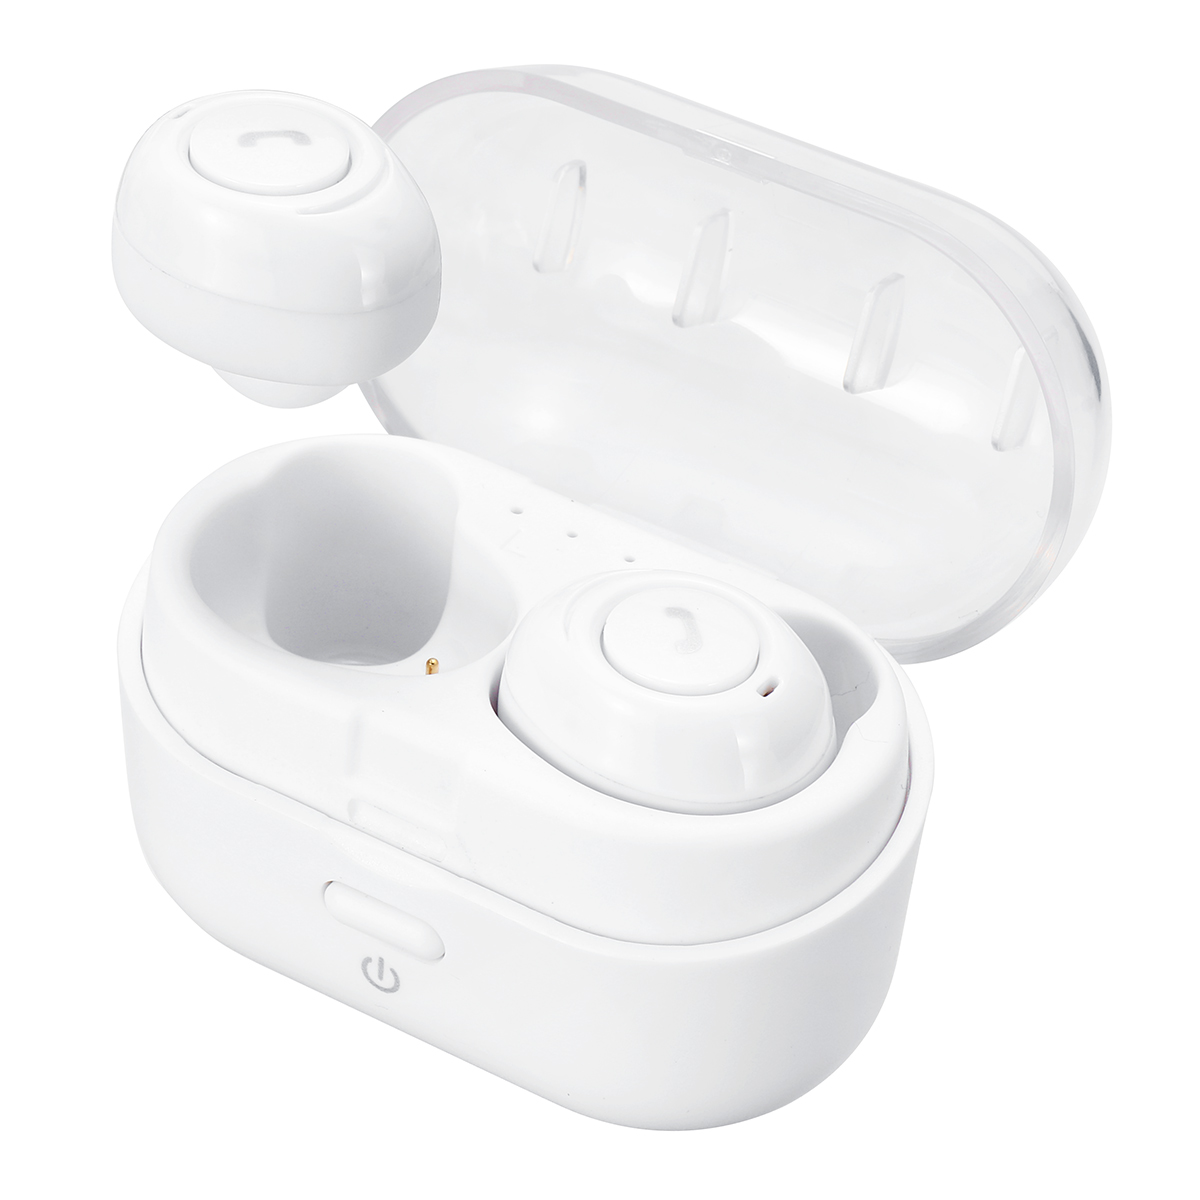 Find TWS True Wireless bluetooth 5 0 Earphone Mini Portable HiFi Stereo IPX5 Waterproof Bilateral Calls Headphone with Charging Box for Sale on Gipsybee.com with cryptocurrencies